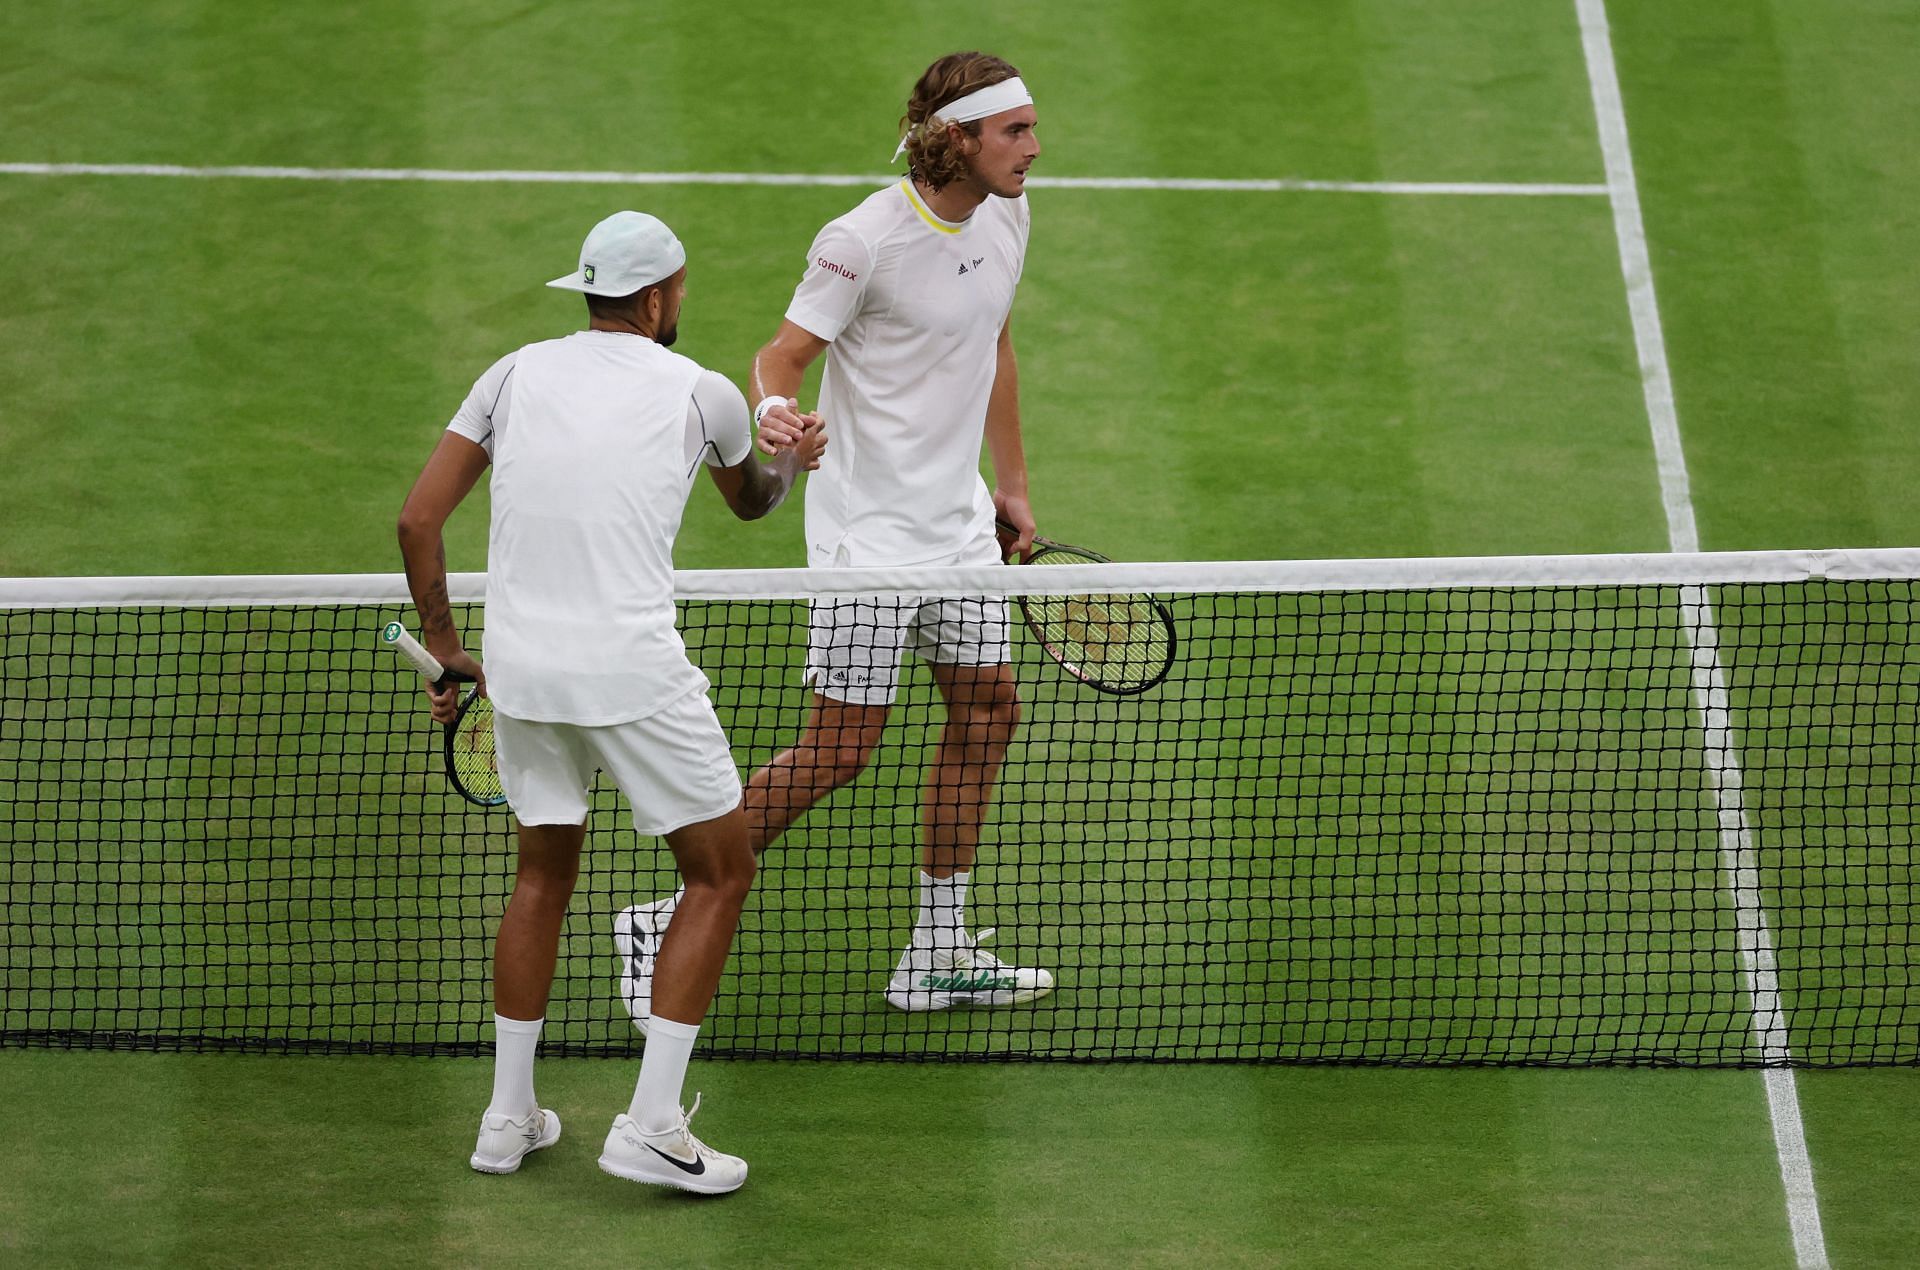 Nick Kyrgios and Stefanos Tsitsipas pictured at the 2022 Wimbledon Championships.